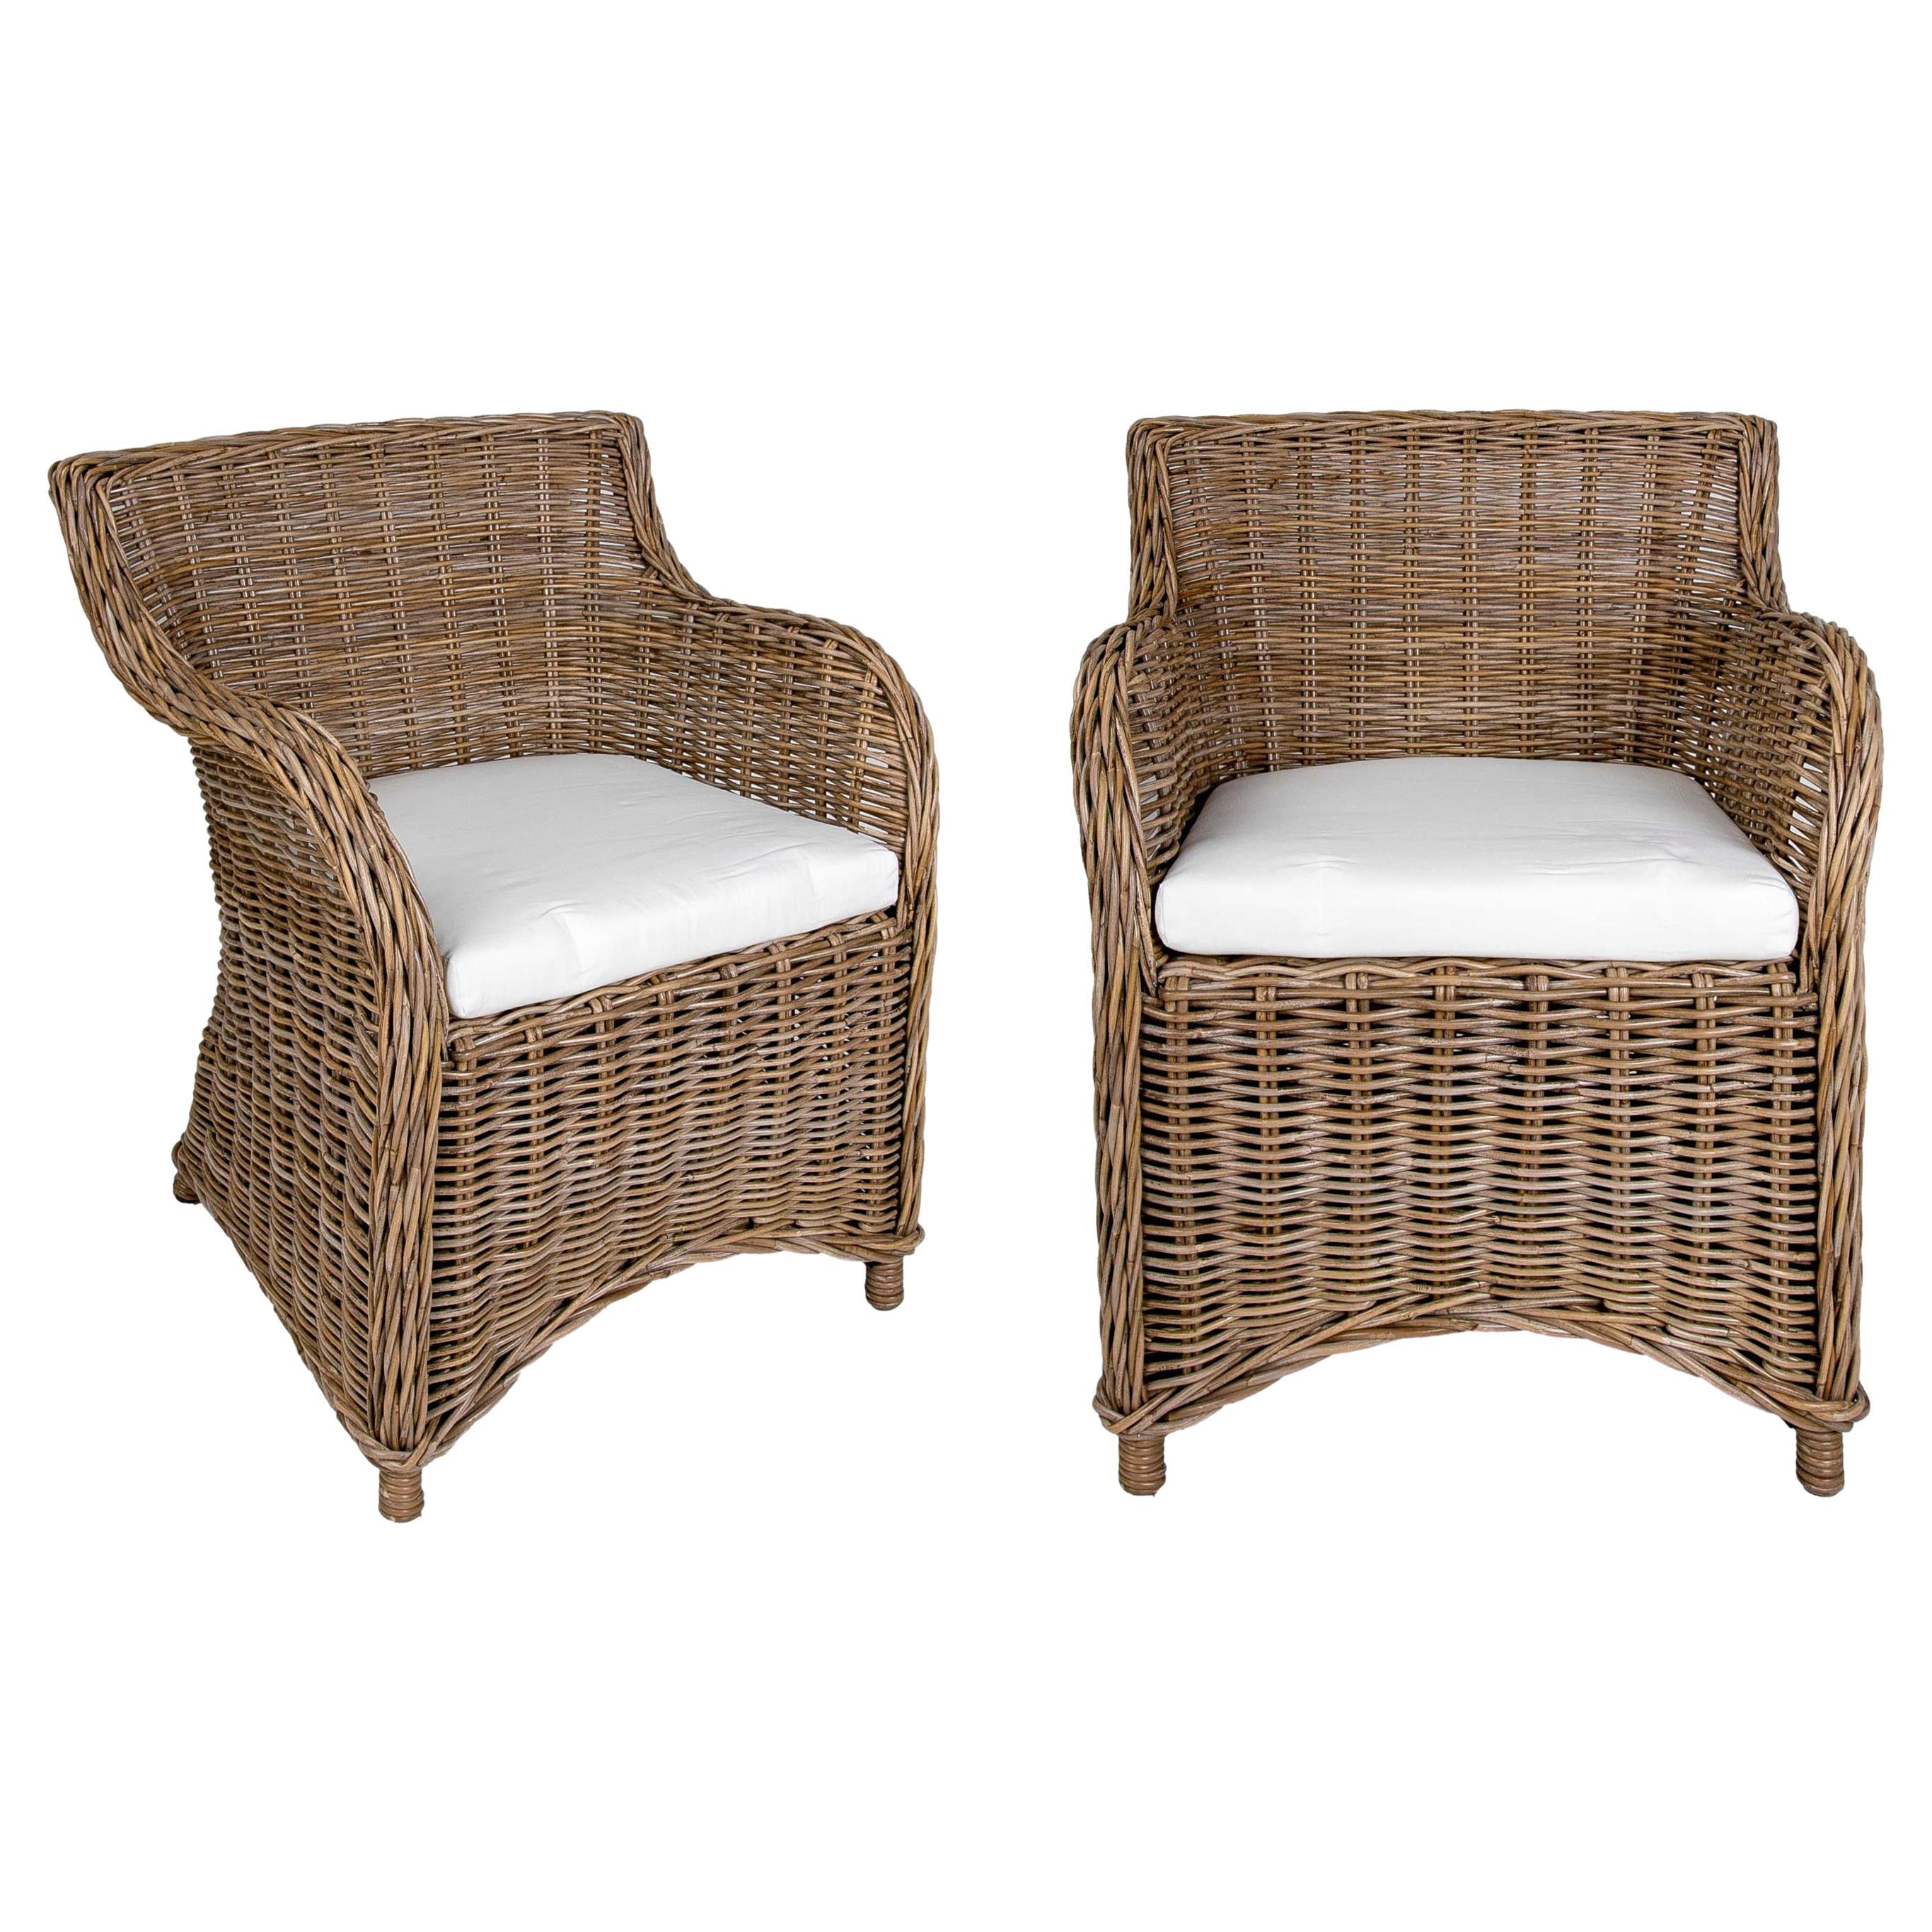 Pair of Rattan Garden Chairs with Cushions in Greyish Tone